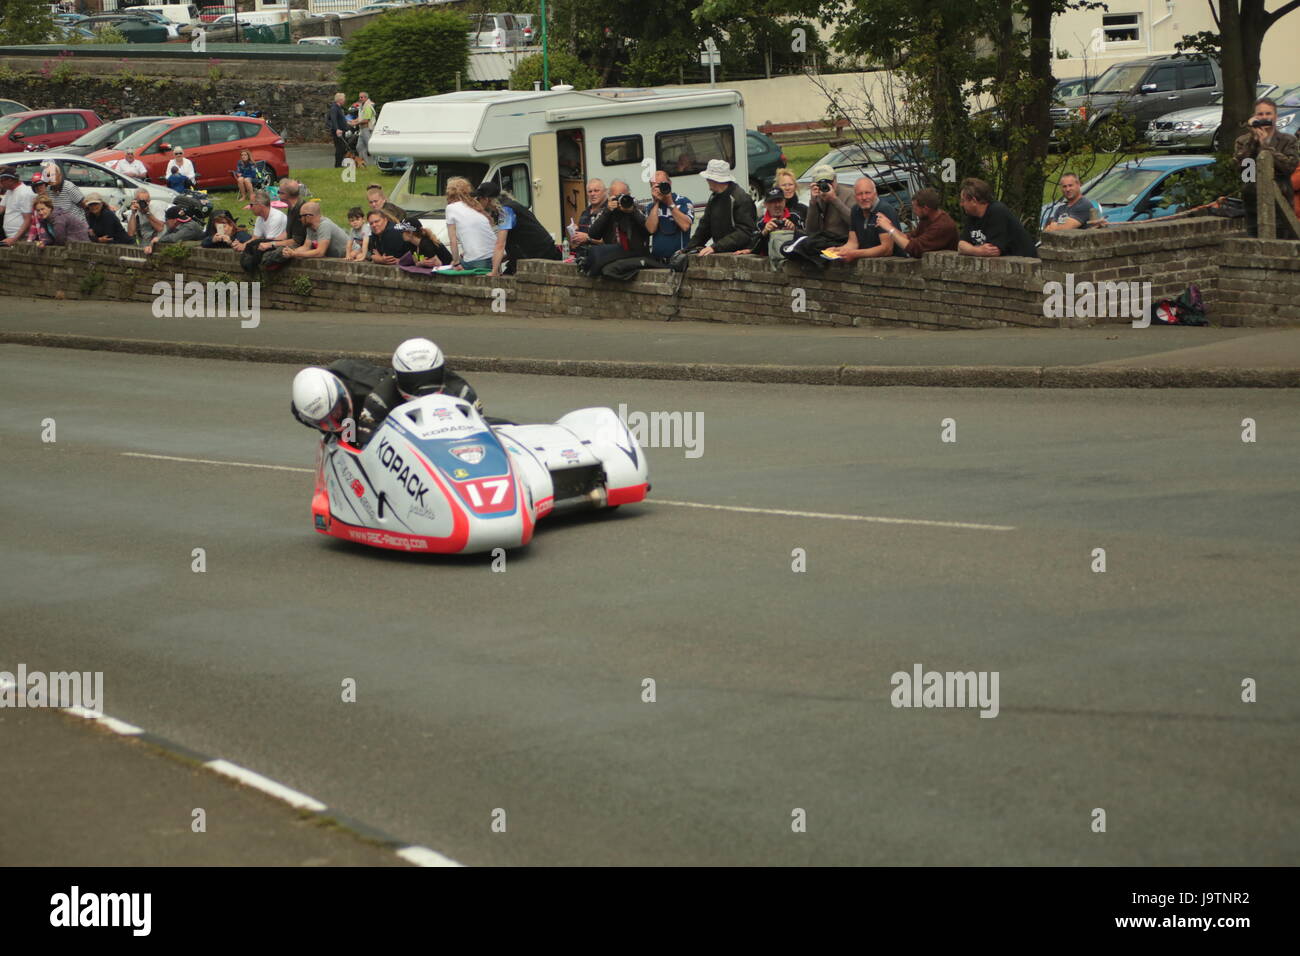 Isle of Man TT Races, Sidecar Qualifying Practice Race, Saturday 3 June 2017. Sidecar qualifying session. Number 17, Mike Roscher and Ben Hughes on their 600cc LCR Suzuki sidecar from the Roscher Racing by Penz13.com team from Germany. Credit: Eclectic Art and Photography/Alamy Live News. Stock Photo